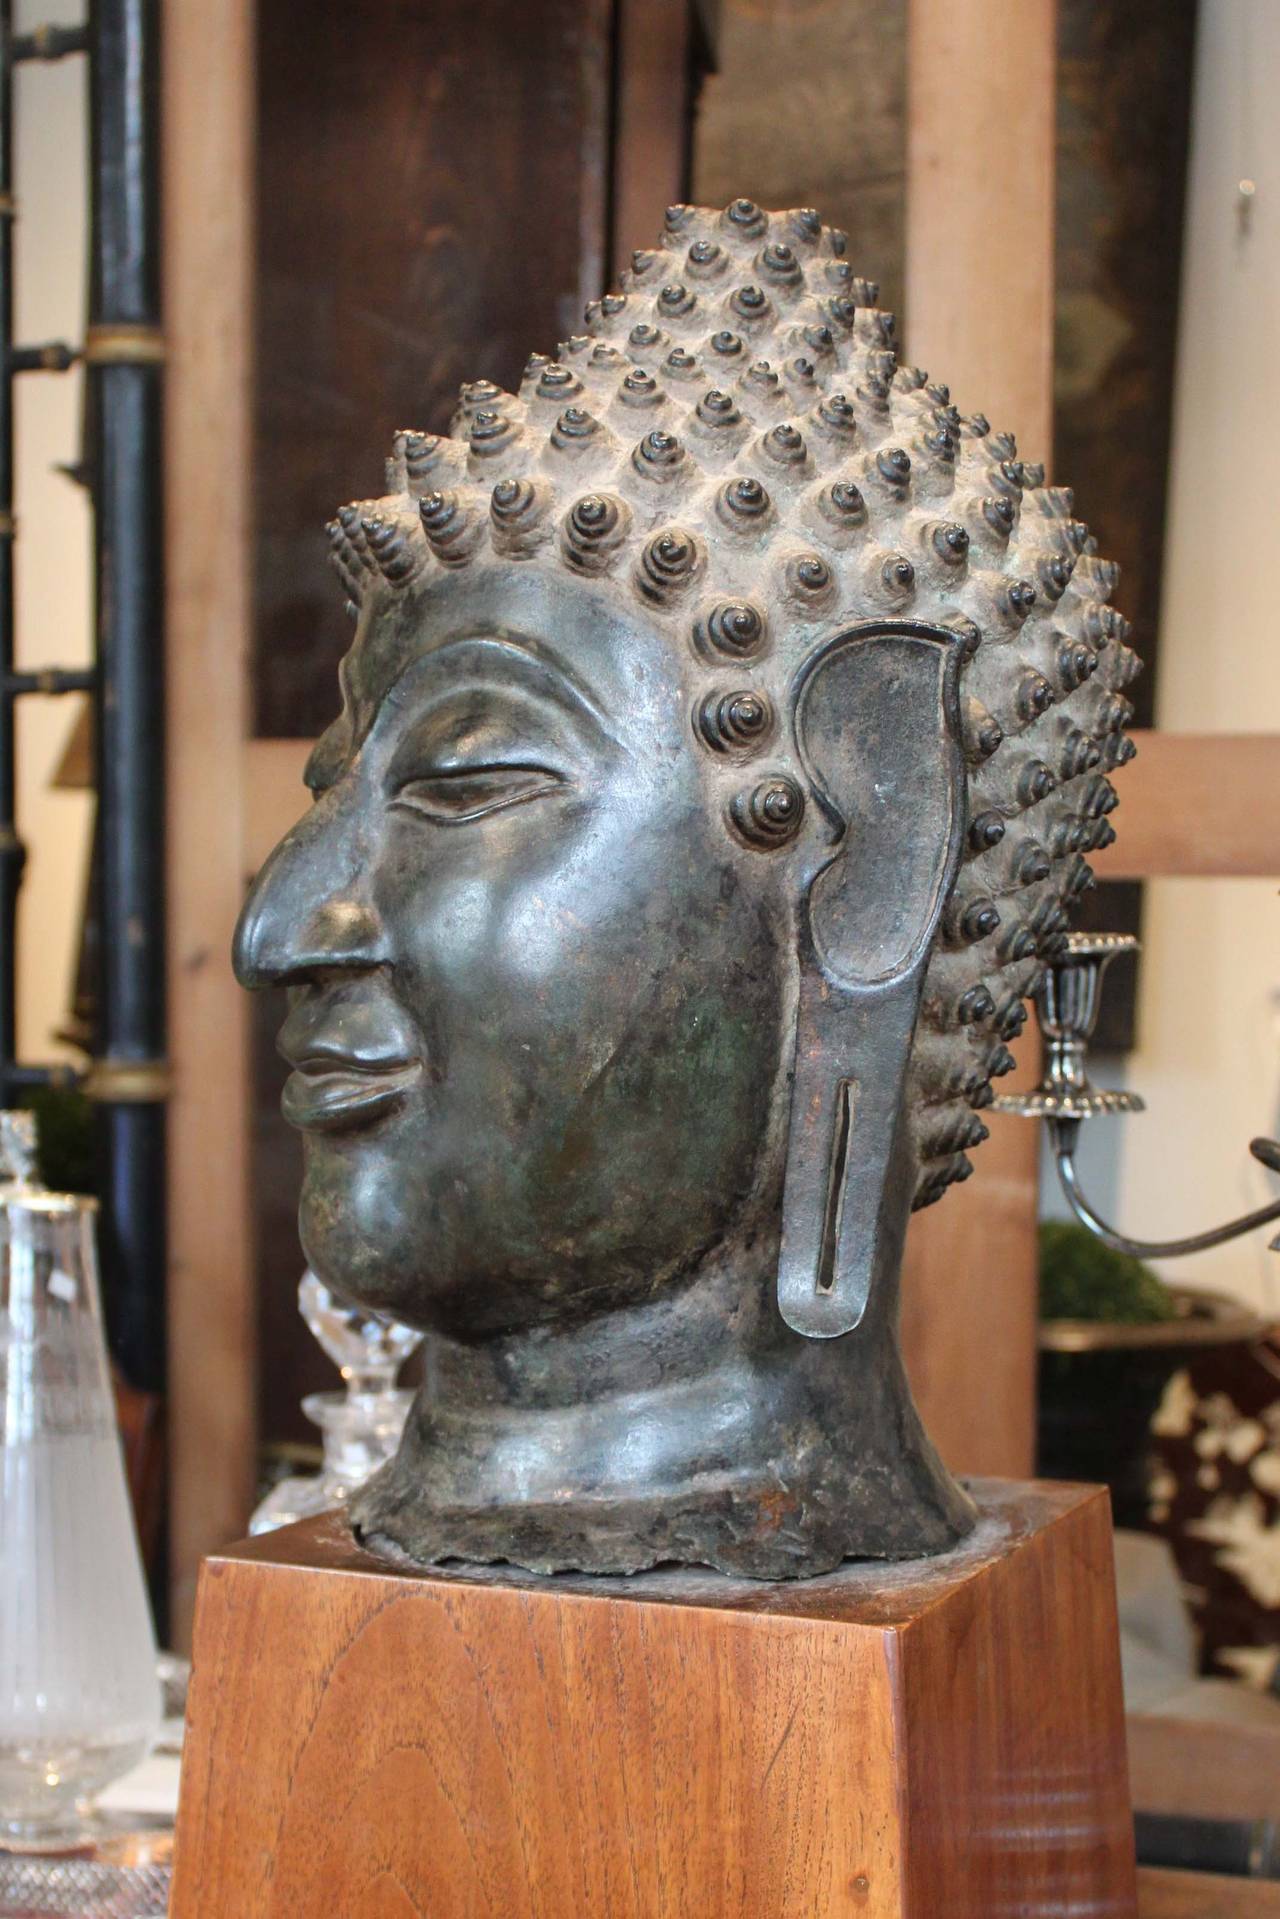 Antique bronze Buddha head in the Chien Seng style Sakyamuni, South East Asian. Face displays serene expression with downcast eyes below arched eyebrows with curled headdress Ushnisha. A fantastic piece complete with wooden base.